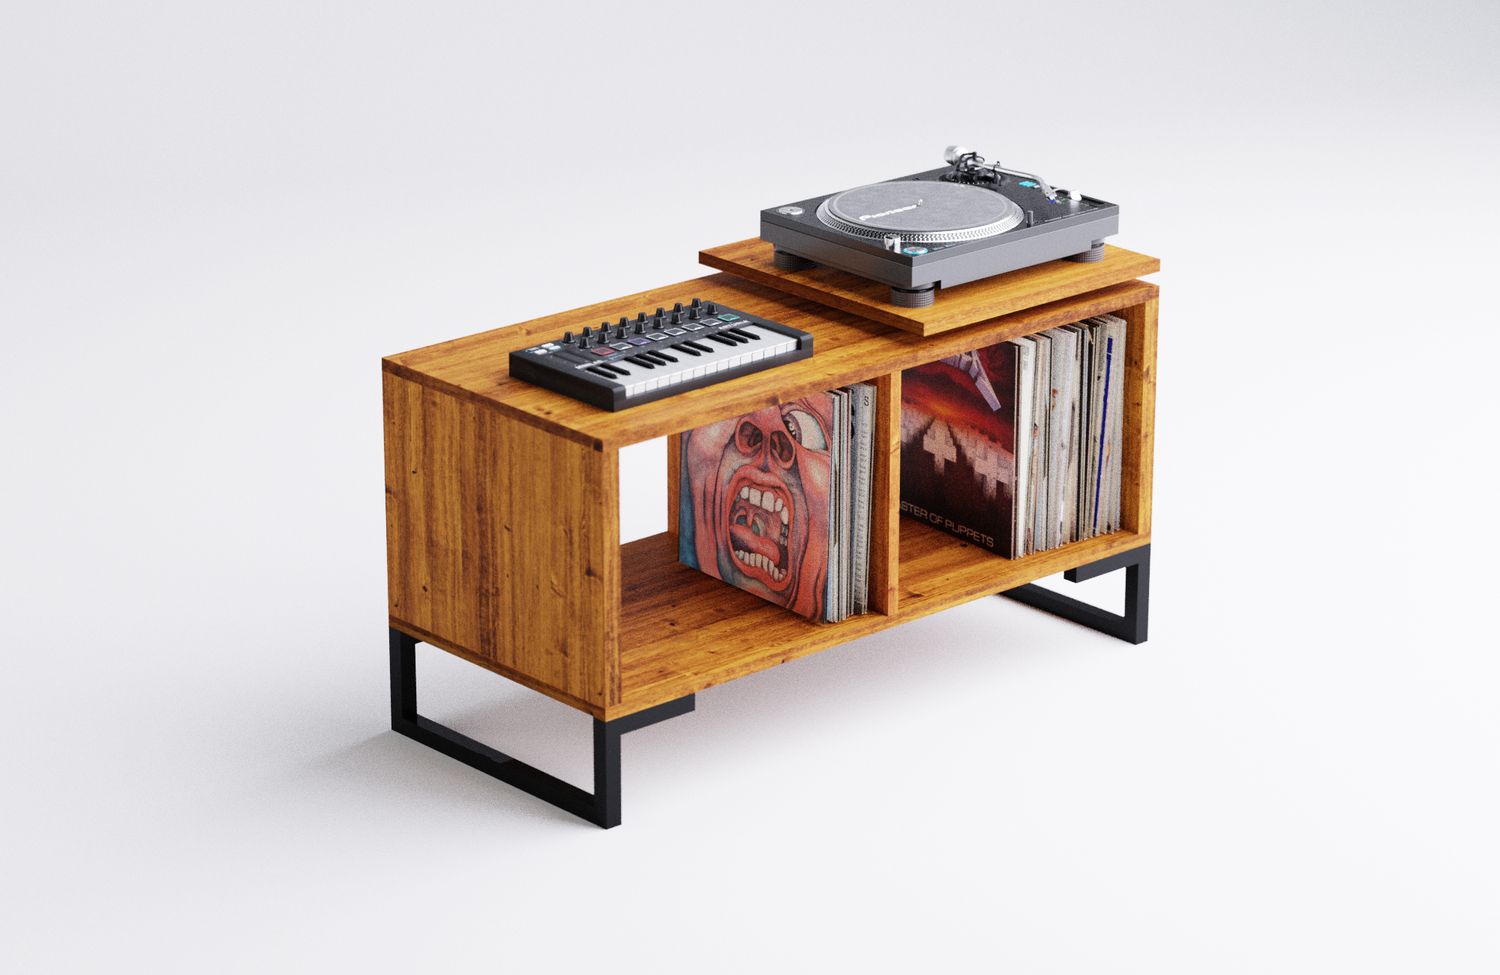 What Are Corner Cabinets With Turntable Used For